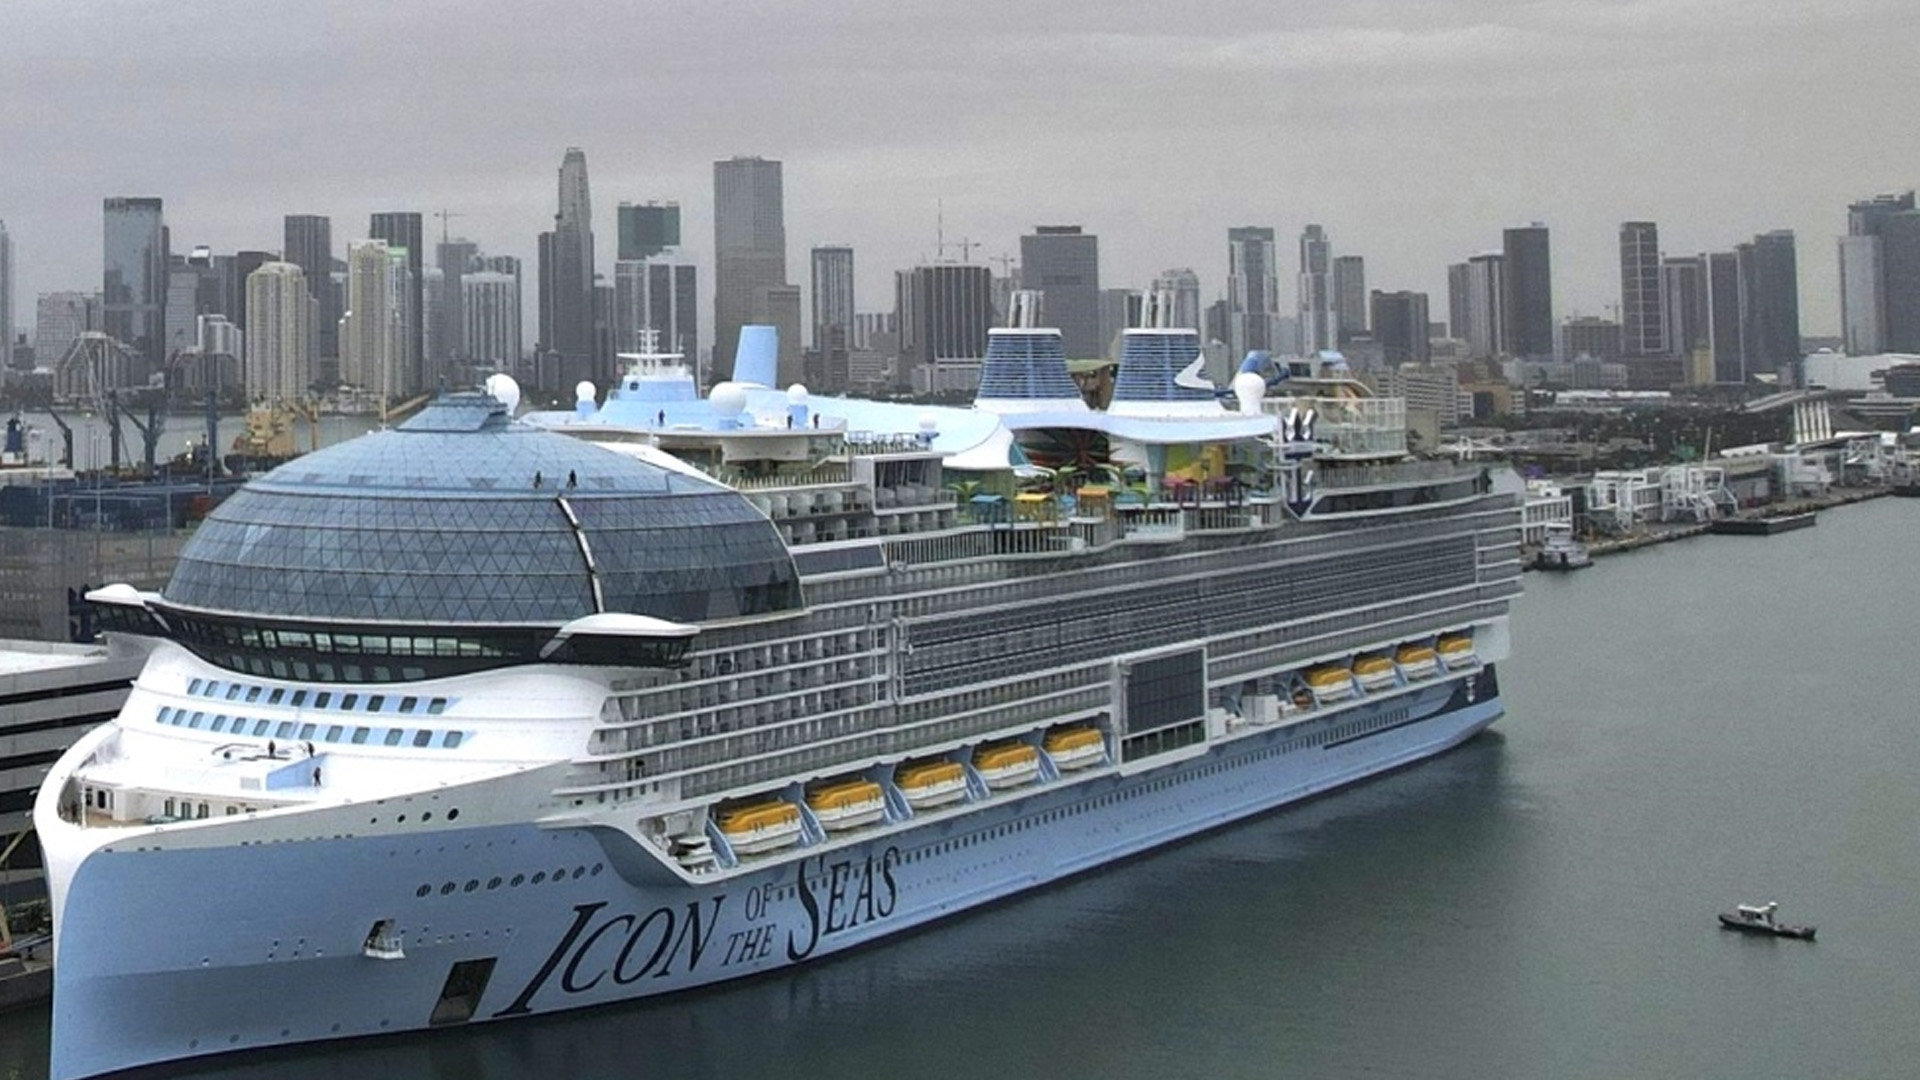 Here's where to see the world's largest cruise ship